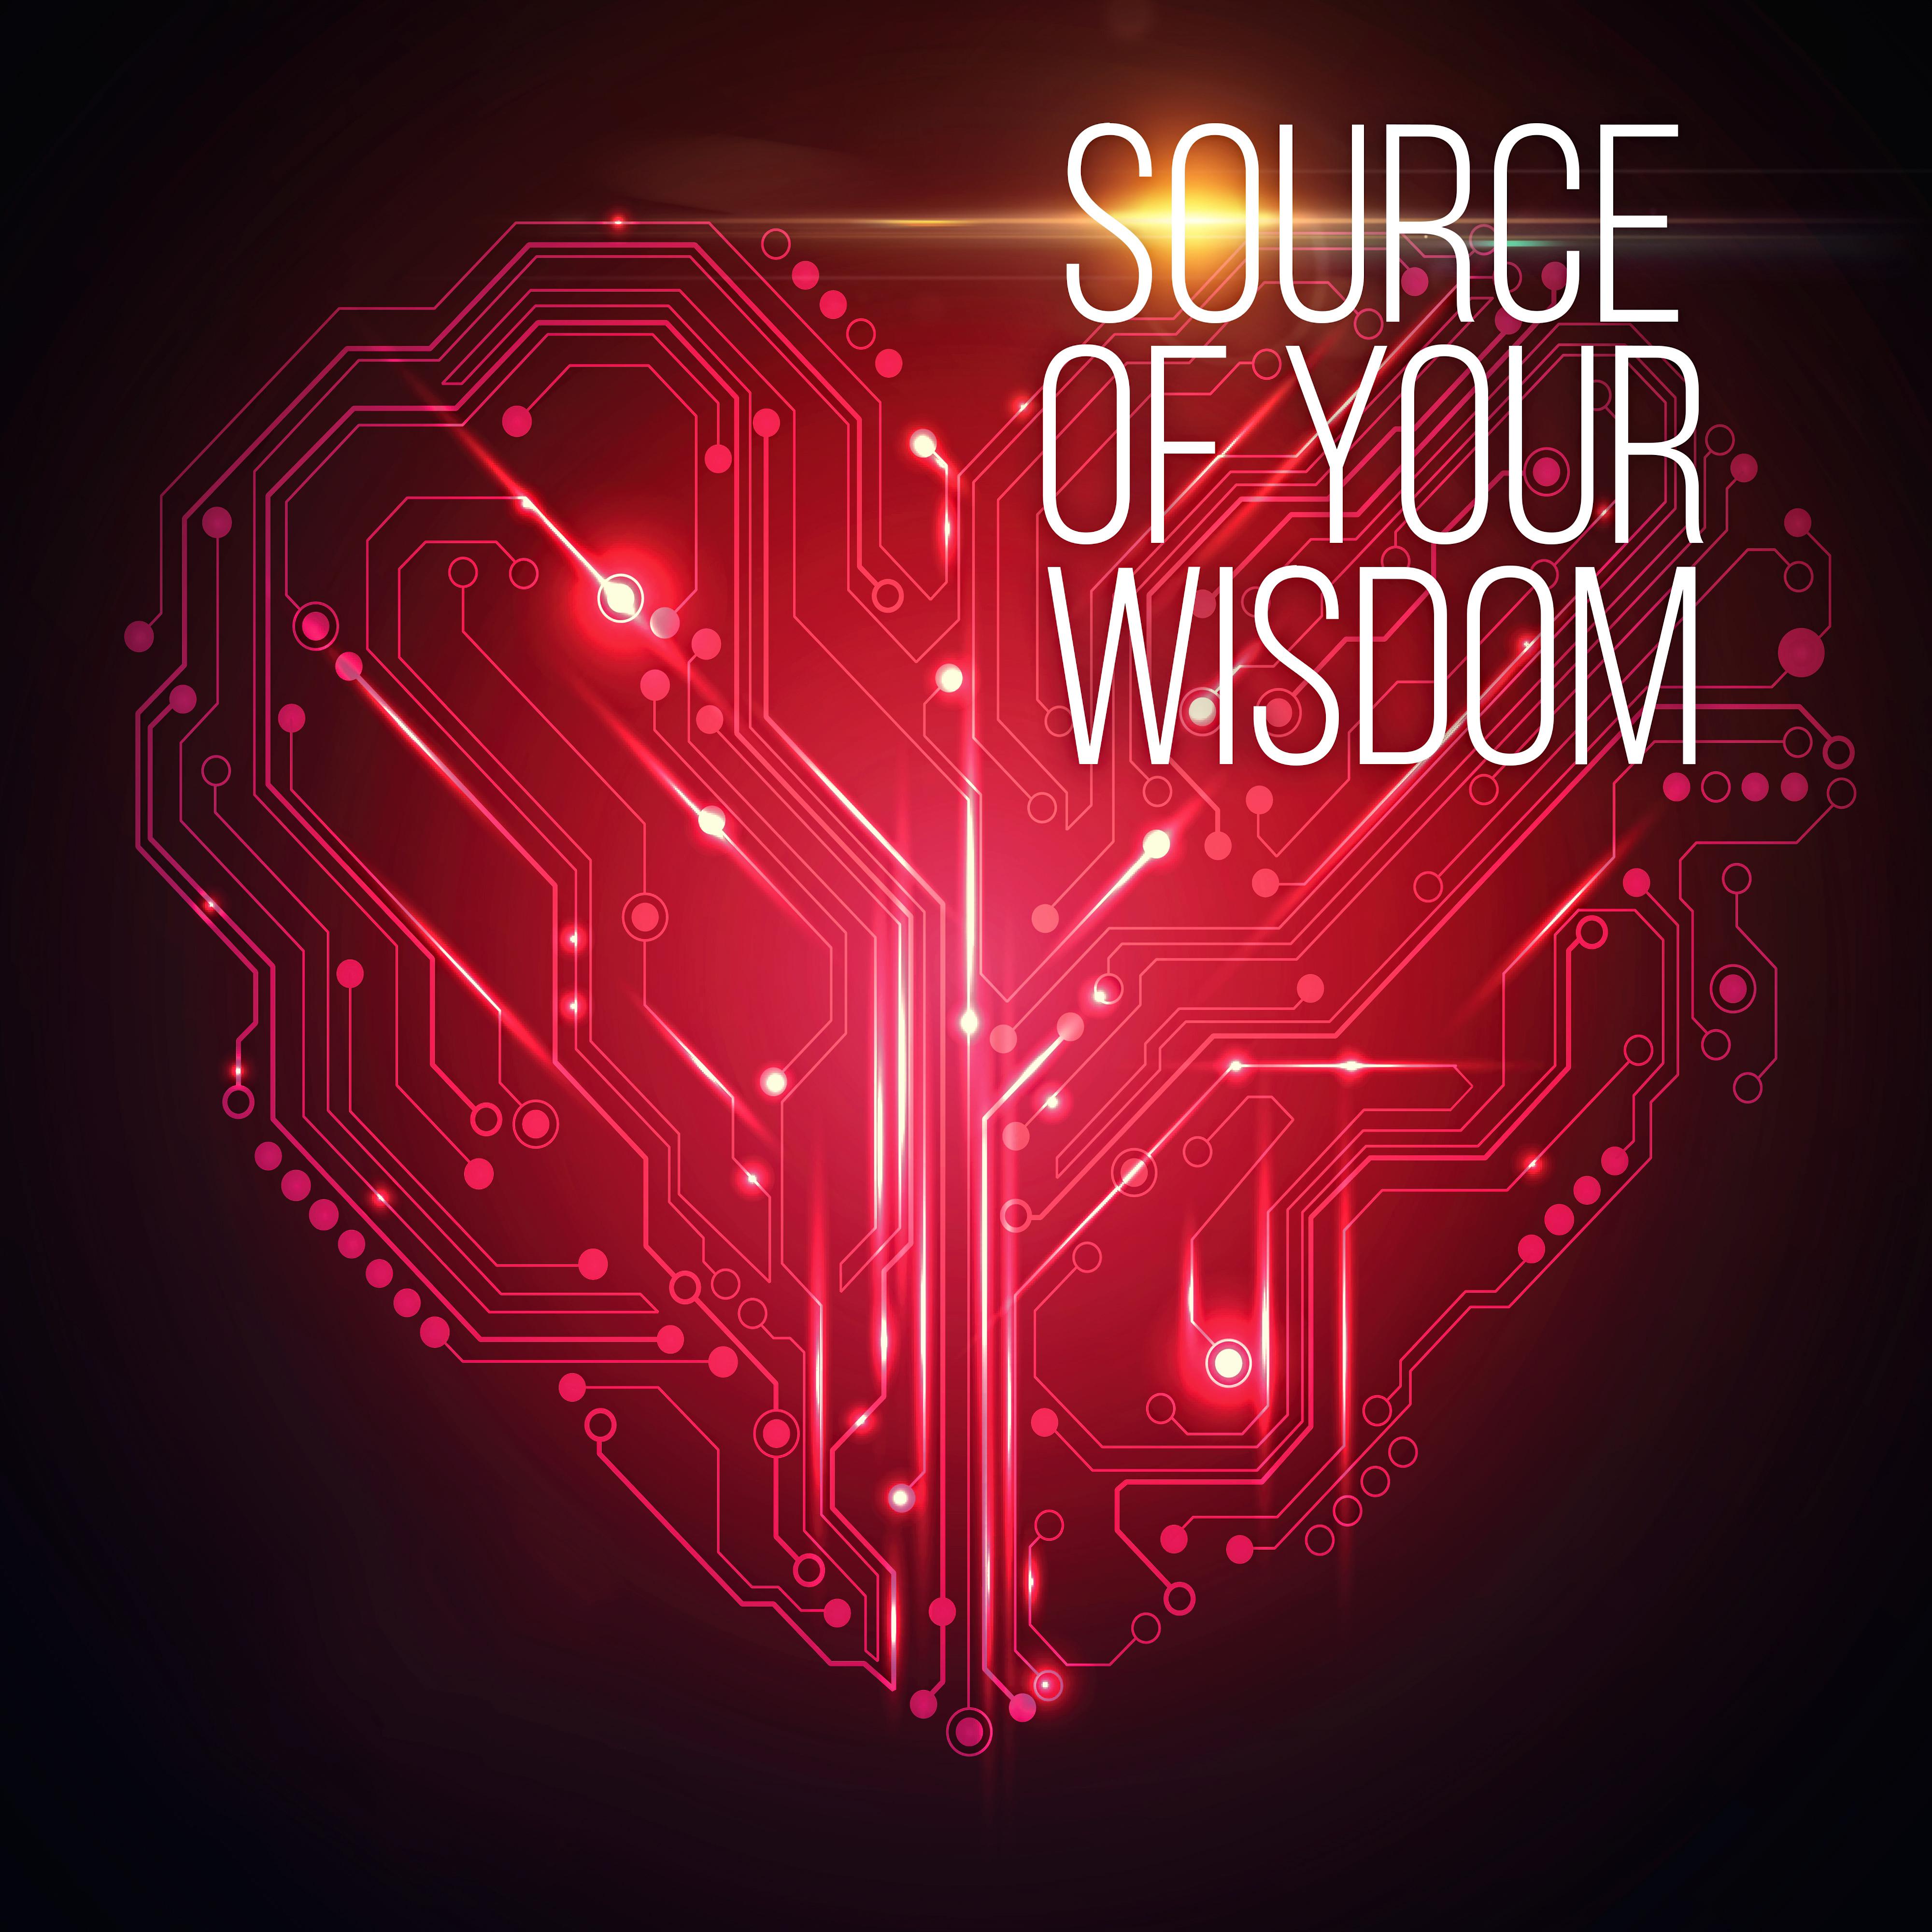 Source of Your Wisdom – New Age Music for Meditation & Concentration, Chakra, Reiki, Yoga, Awareness, Insight, Mindfulness, Sound Therapy Relaxation